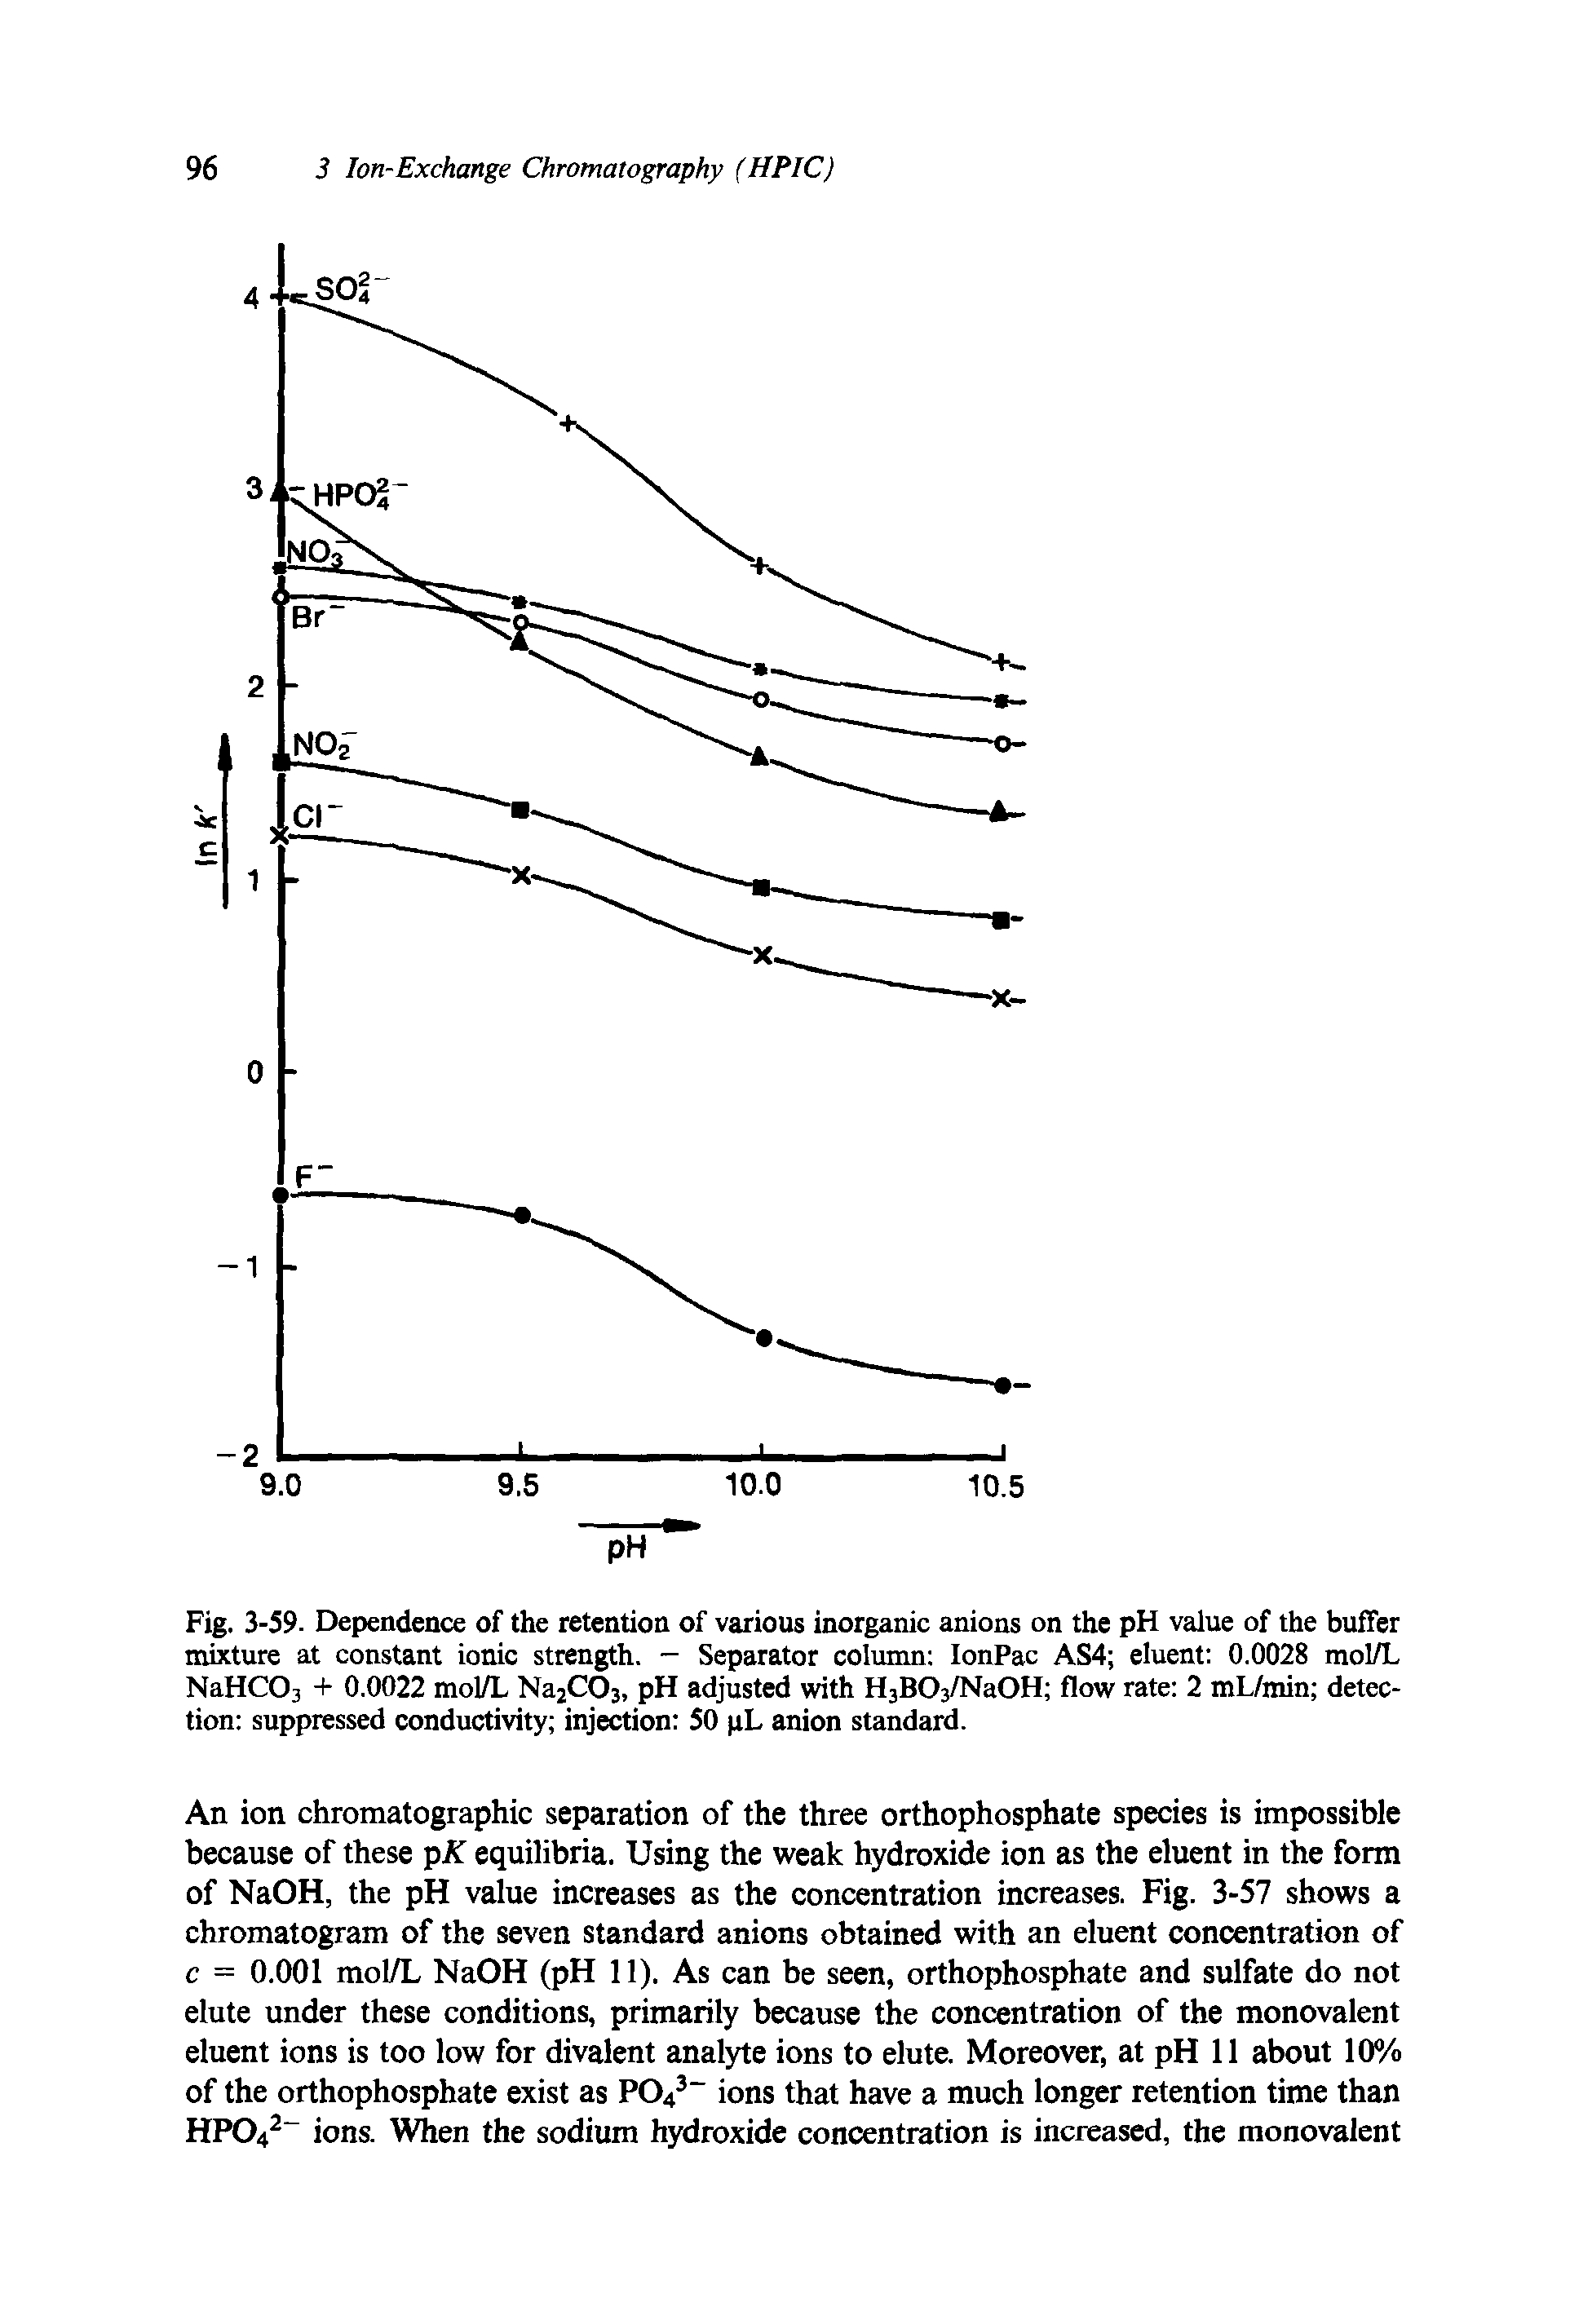 Fig. 3-59. Dependence of the retention of various inorganic anions on the pH value of the buffer mixture at constant ionic strength. - Separator column IonPac AS4 eluent 0.0028 mol/L NaHC03 + 0.0022 mol/L Na2C03, pH adjusted with H3BC>3/NaOH flow rate 2 mL/min detection suppressed conductivity injection 50 pL anion standard.